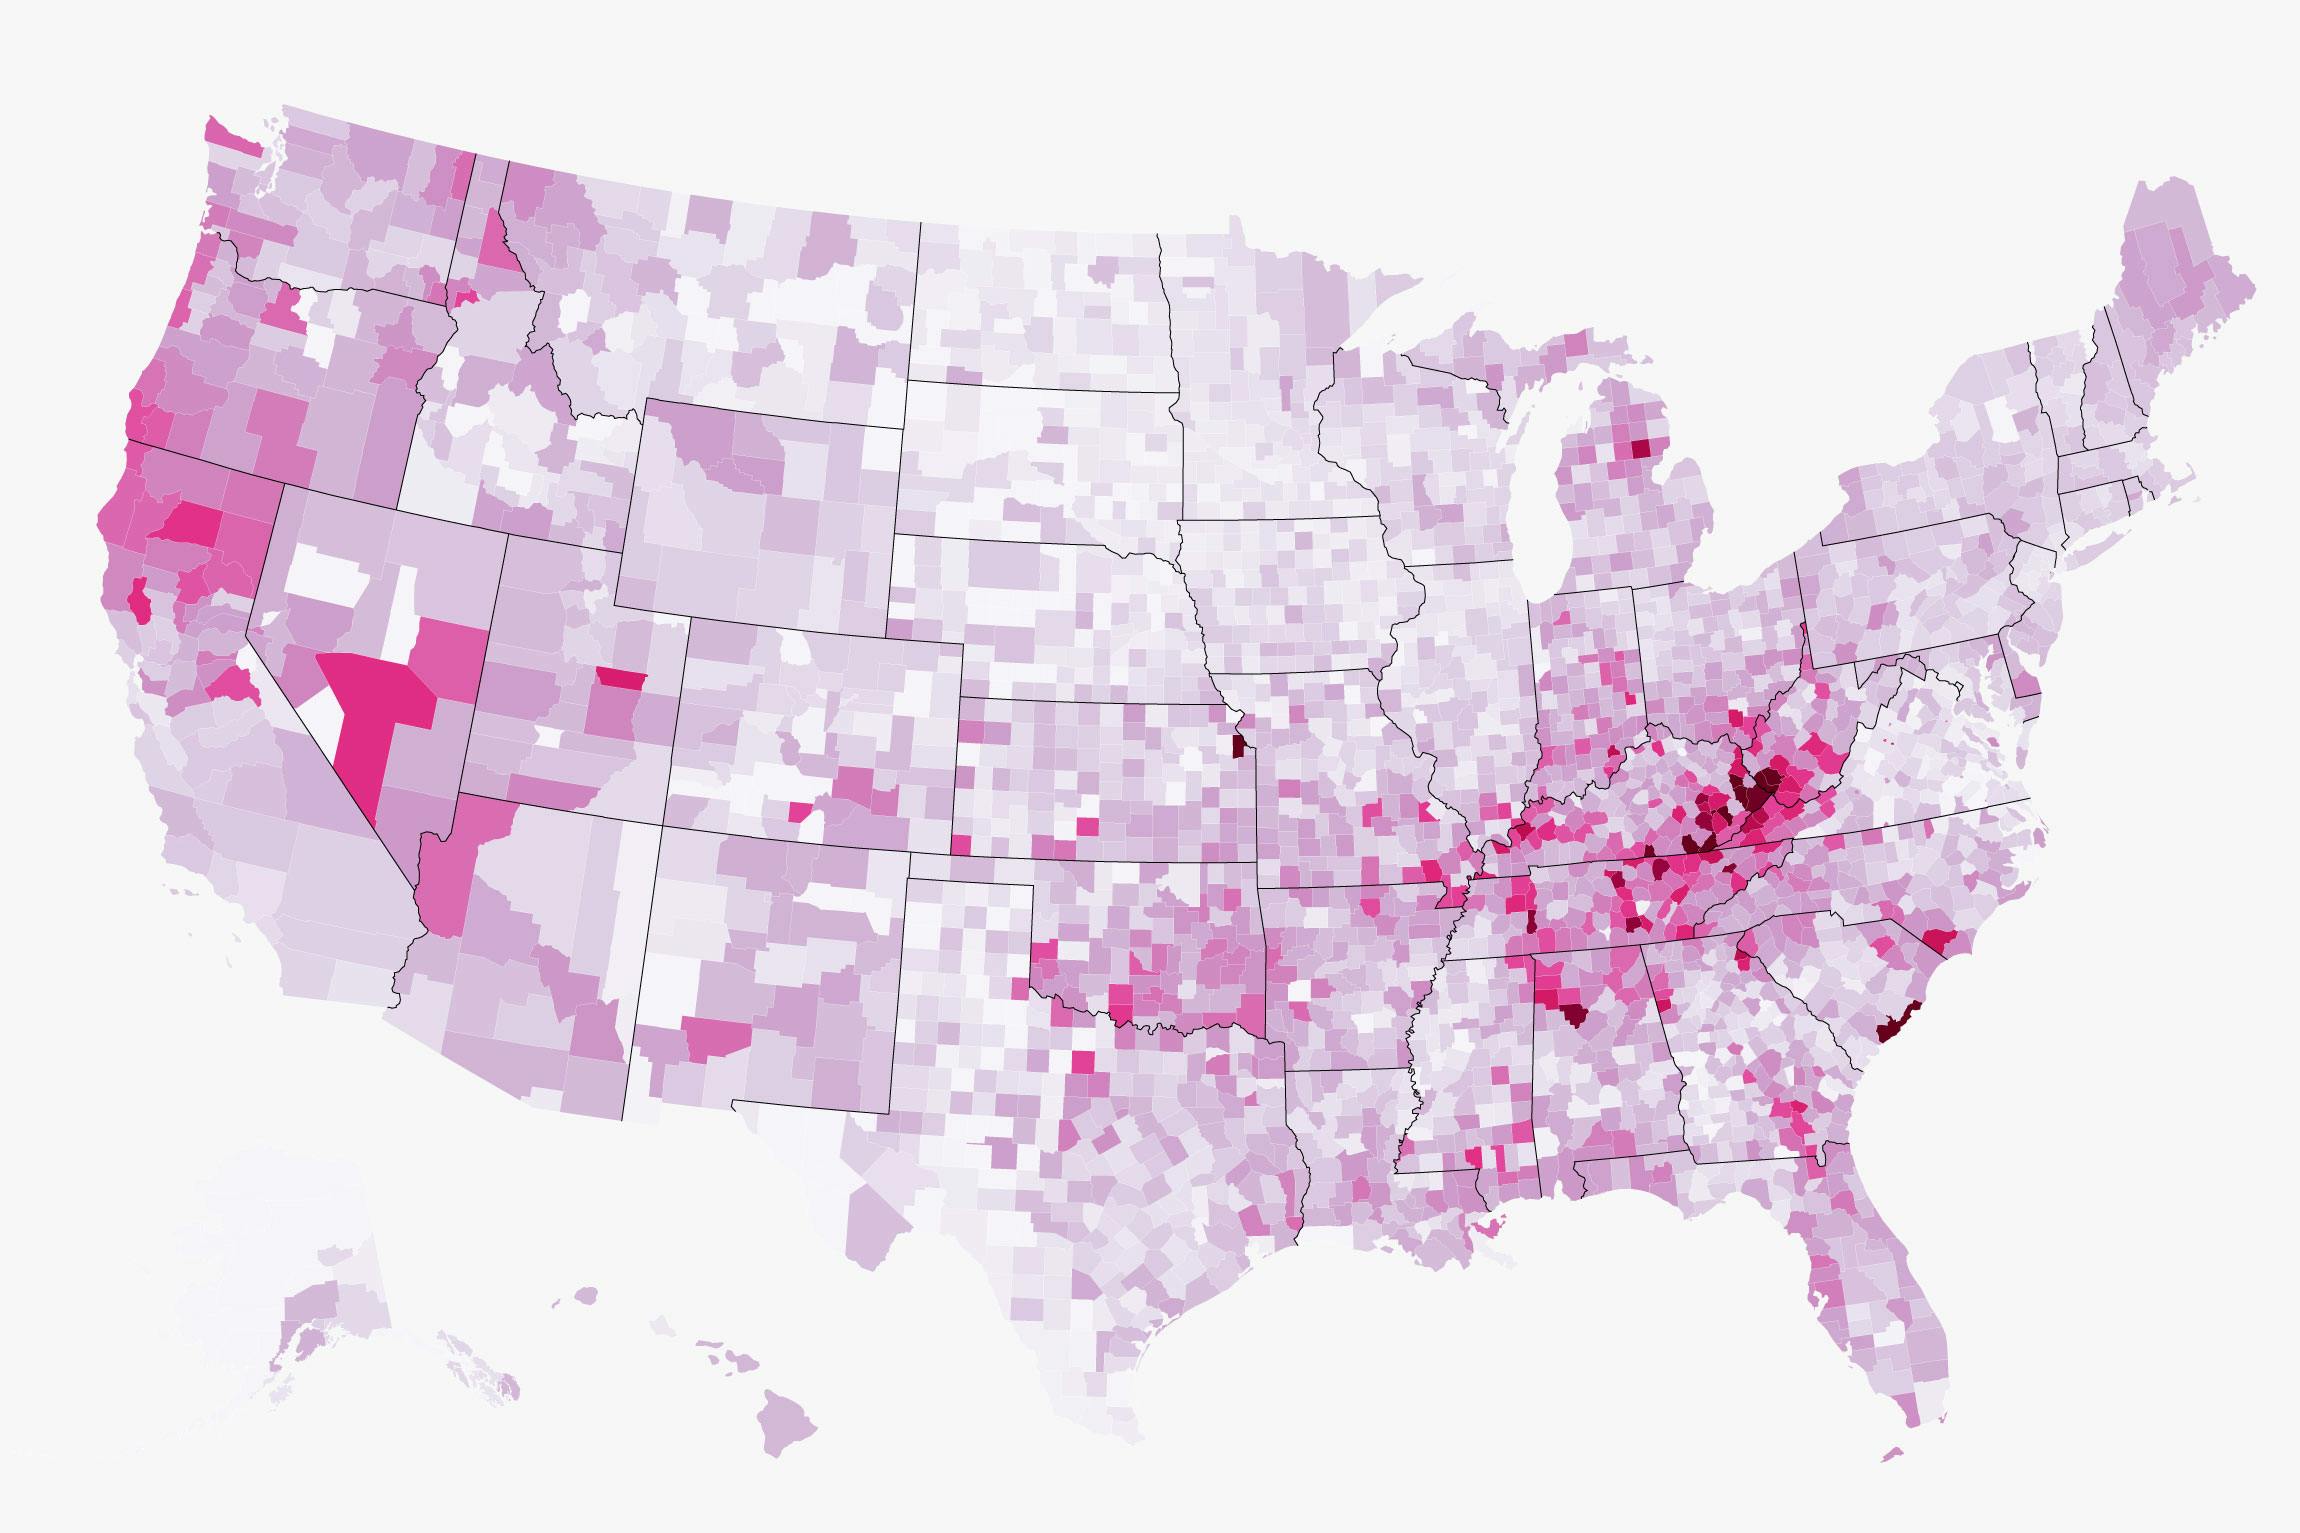 Digital map of US that shows intensity of prescription pain pill surge though color saturation.